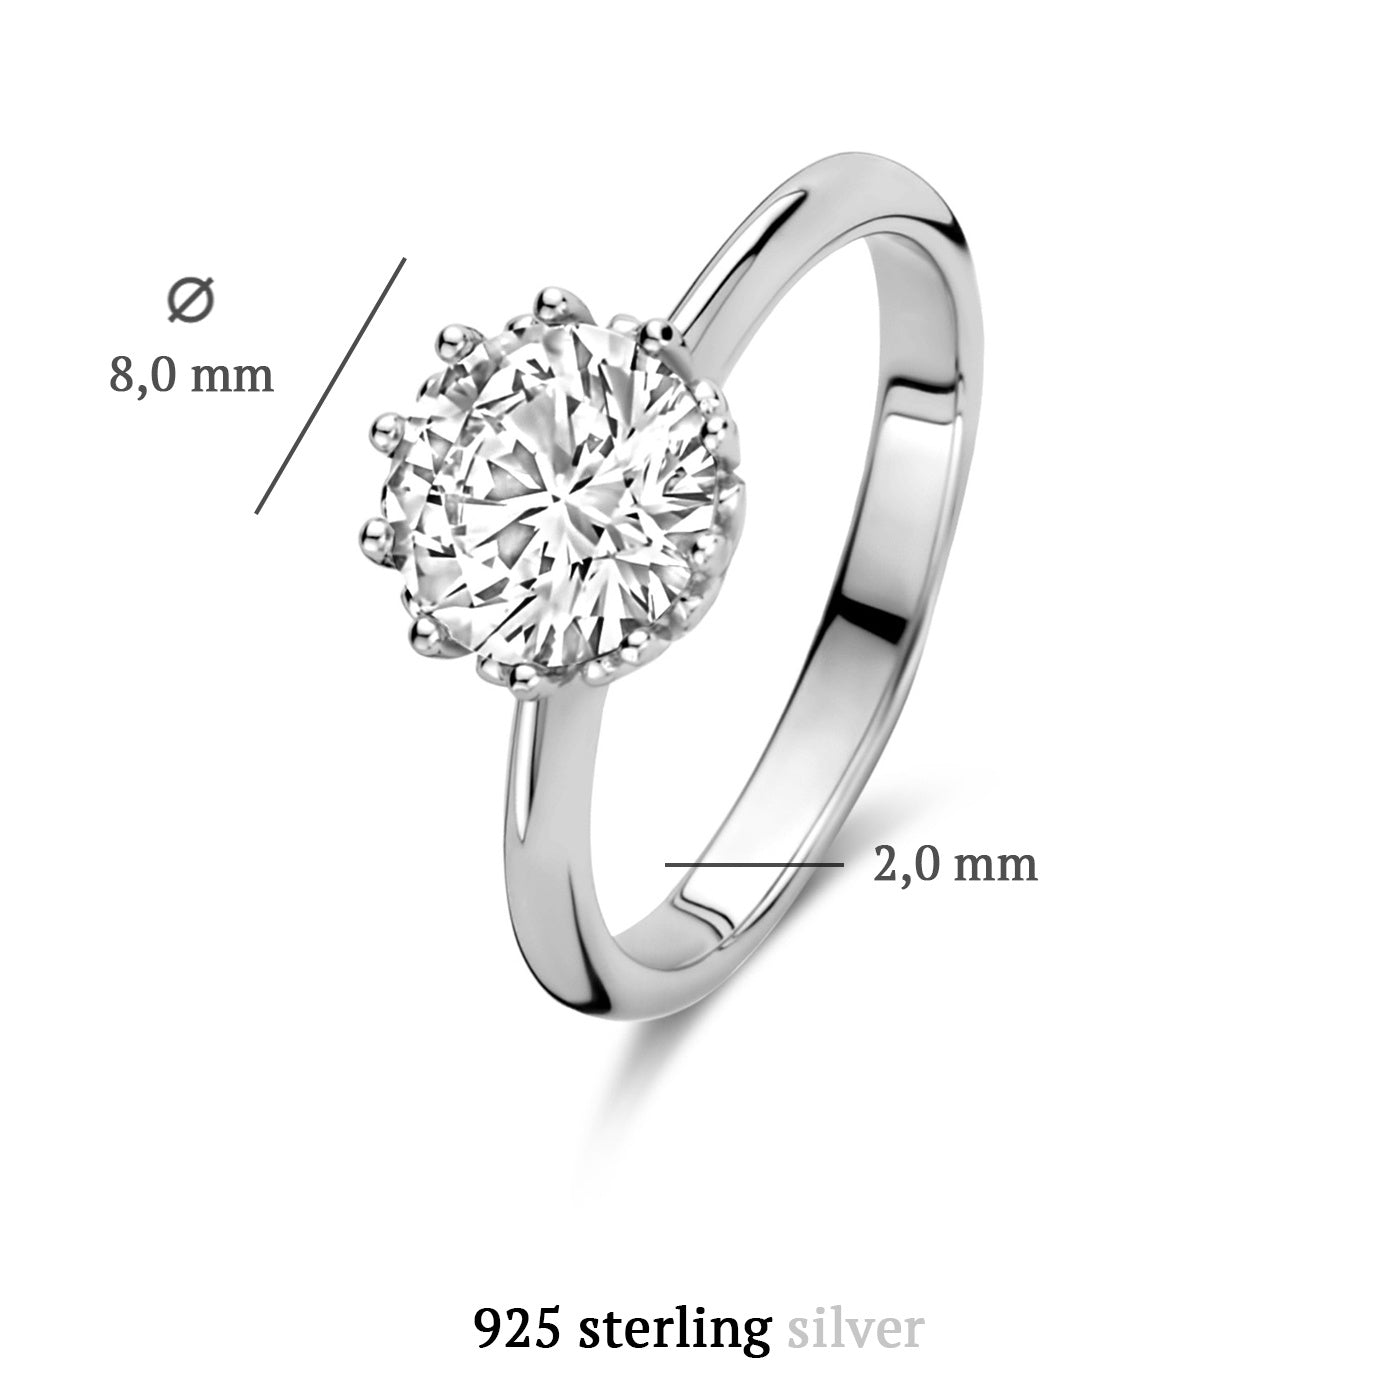 Cento Luci Maxima 925 sterling sølvring